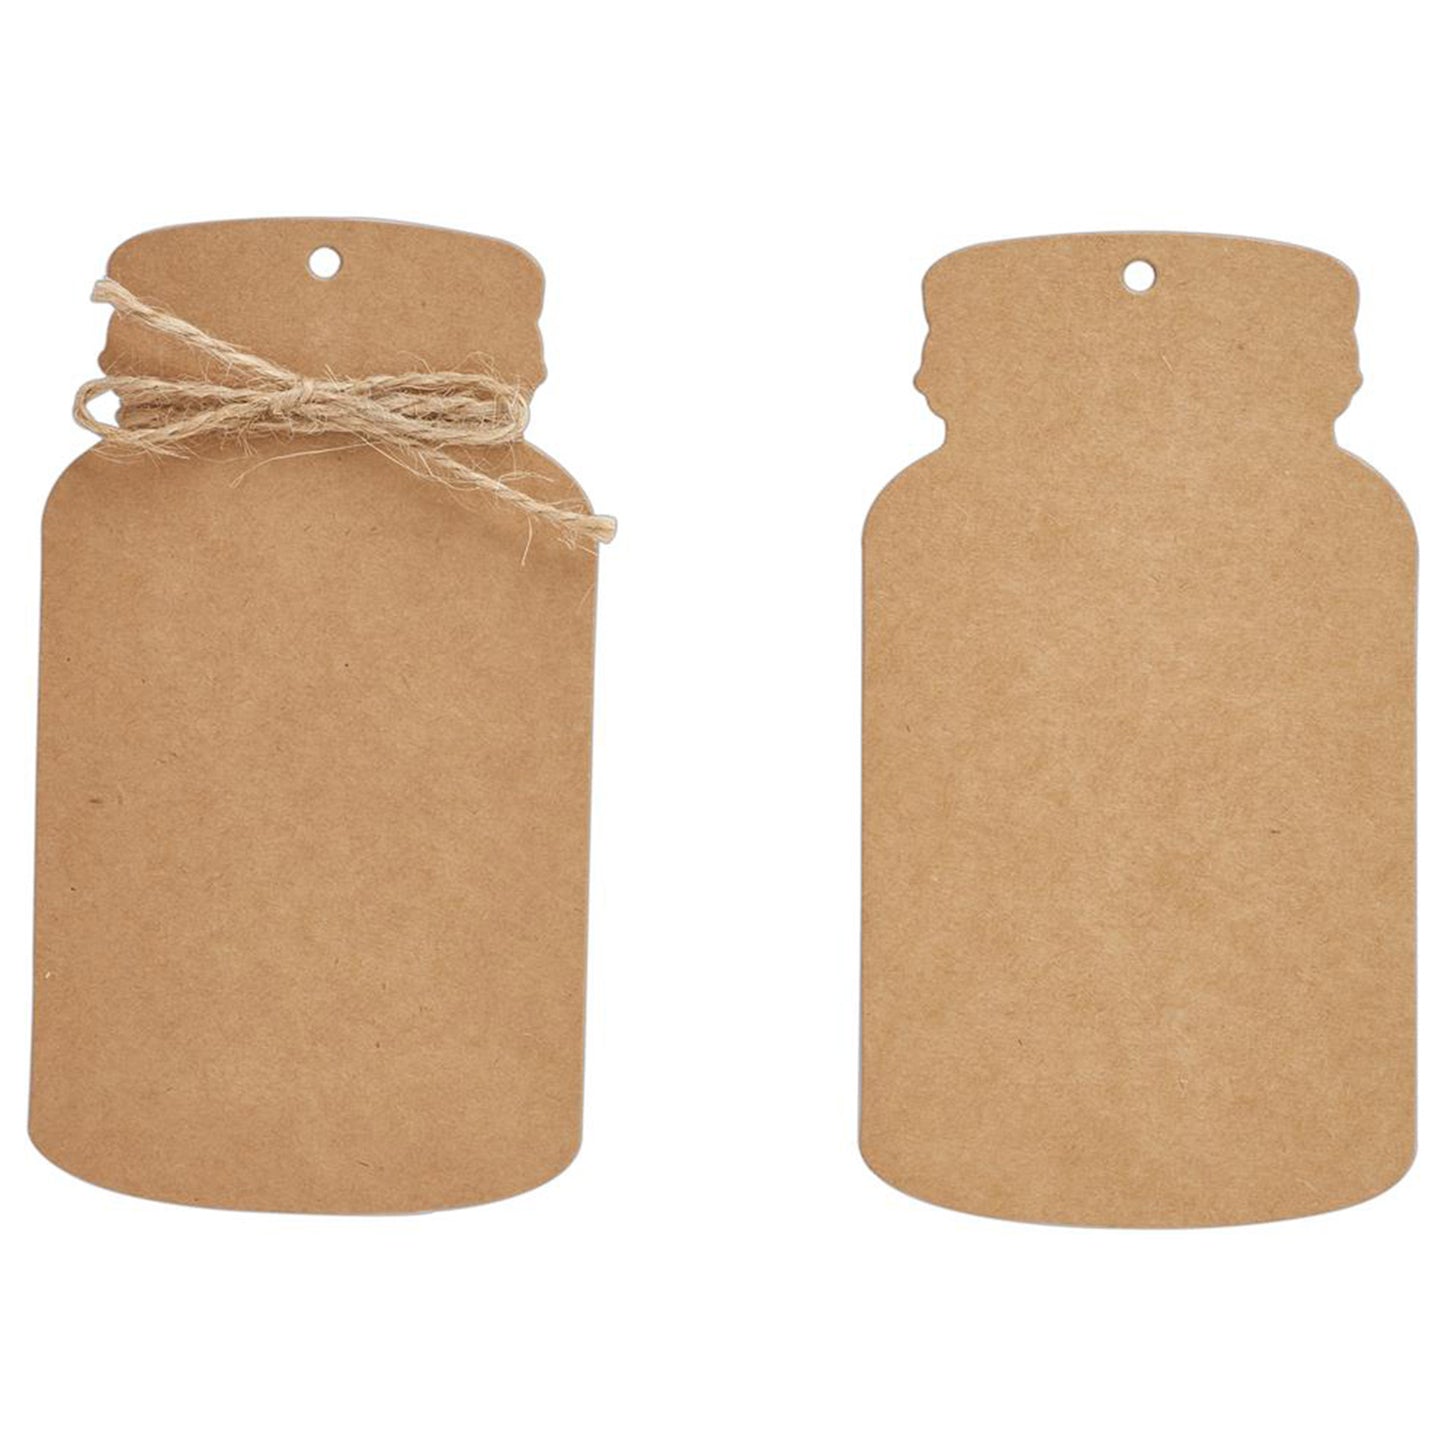 Do Crafts - Gift Tags with String (12pk) - Bare Basics Mini Bottle